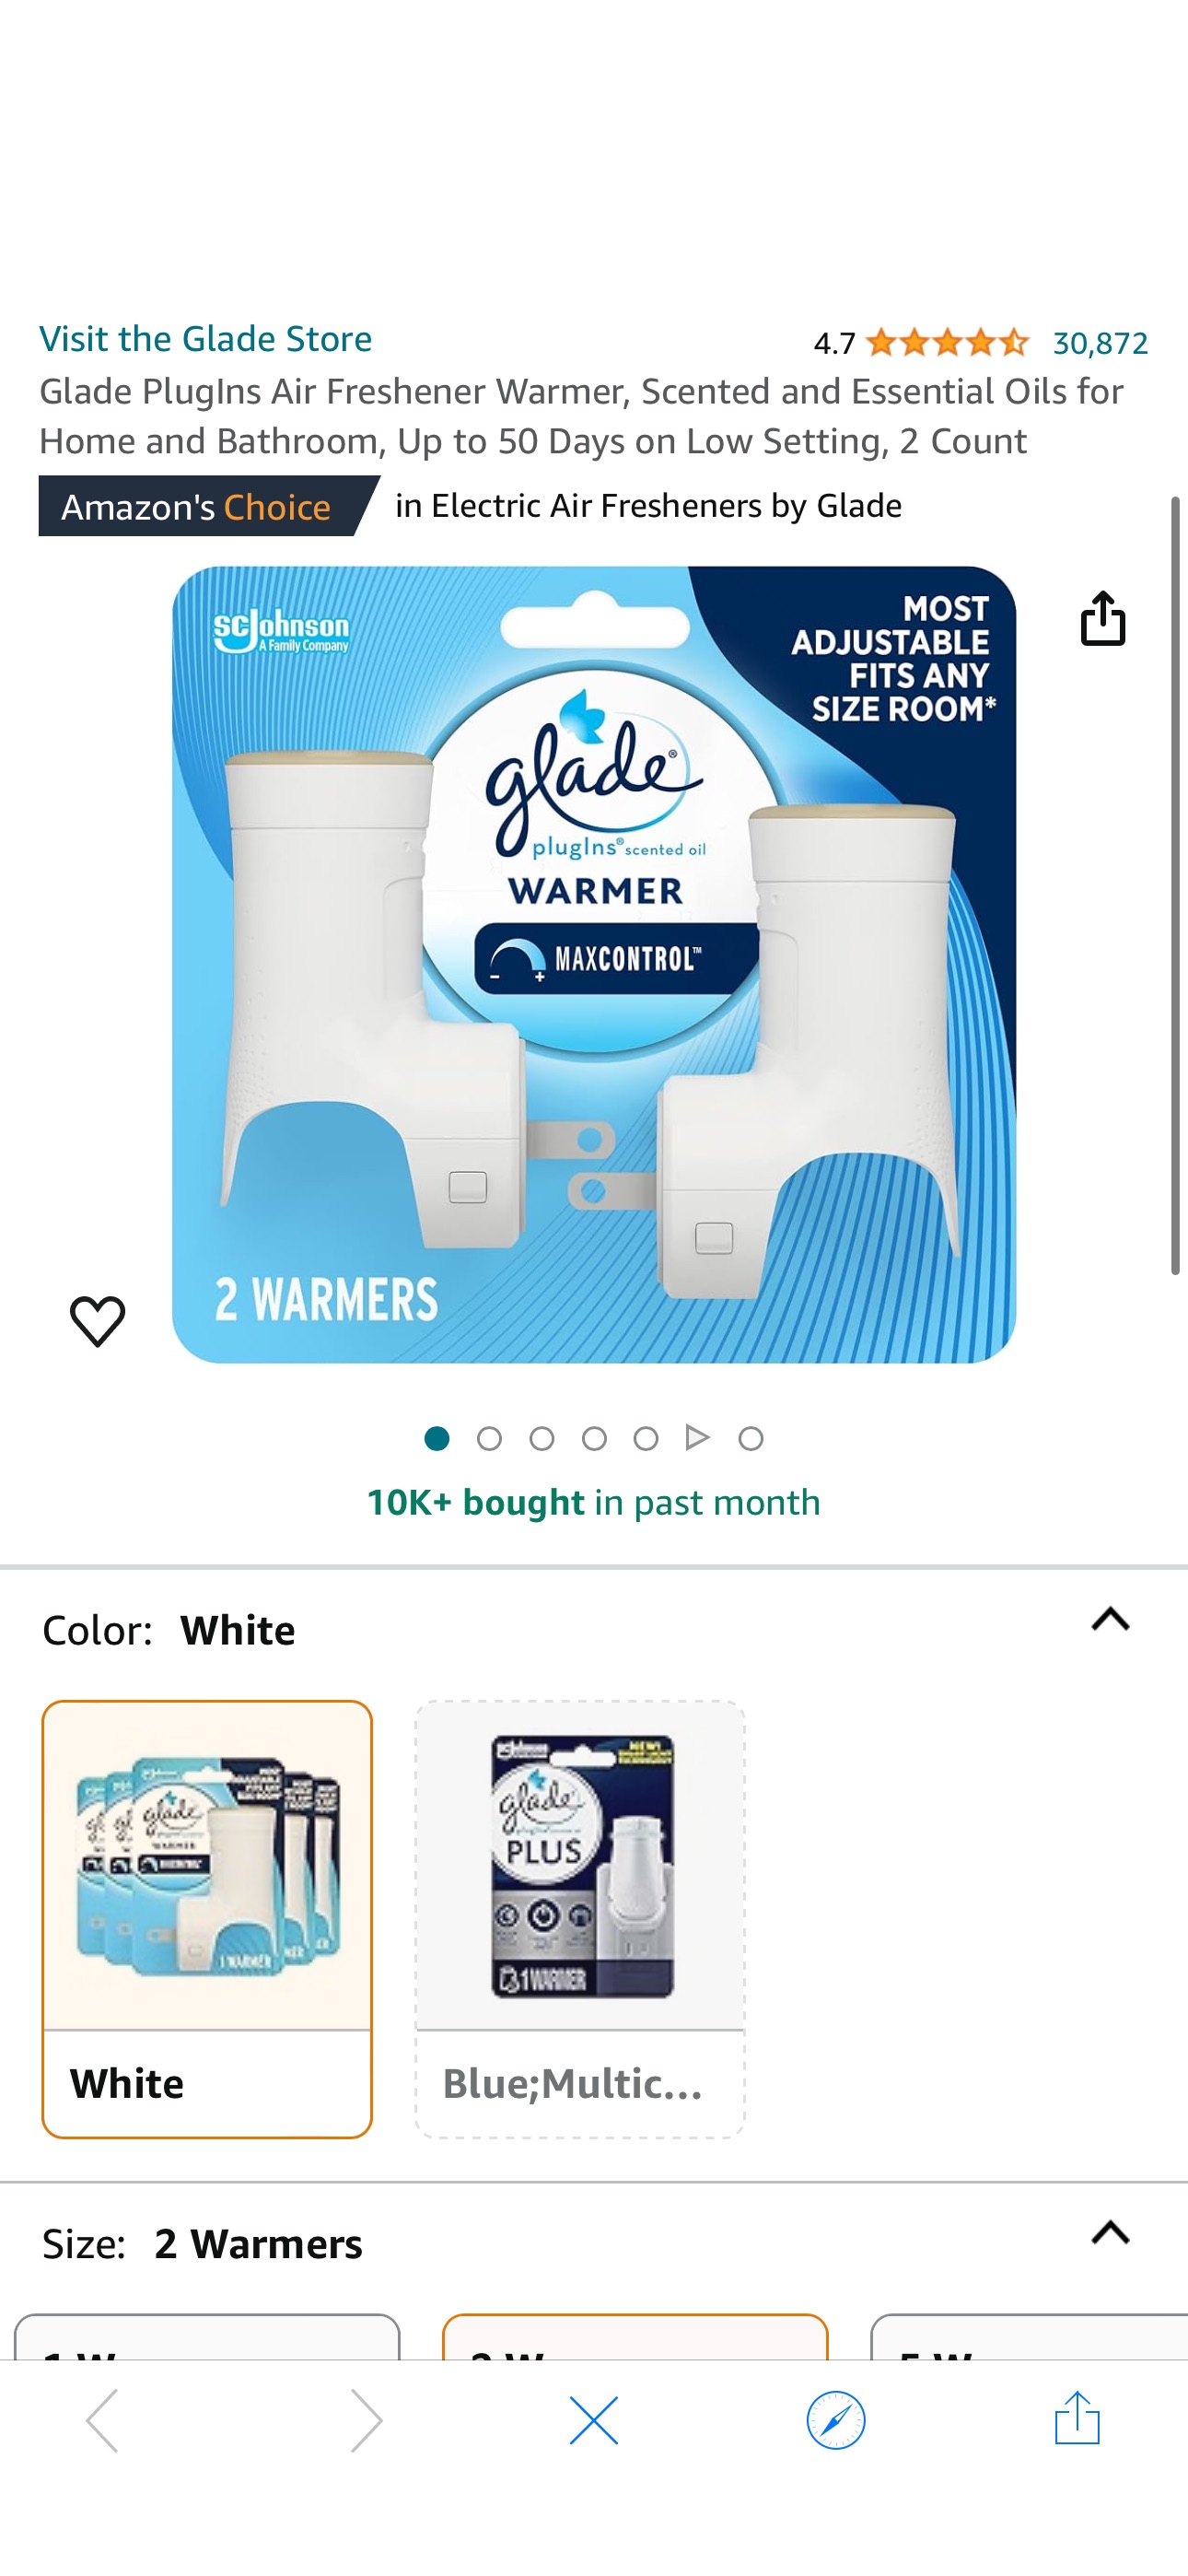 Amazon.com: Glade PlugIns Air Freshener Warmer, Scented and Essential Oils for Home and Bathroom, Up to 50 Days on Low Setting, 2 Count : Everything Else